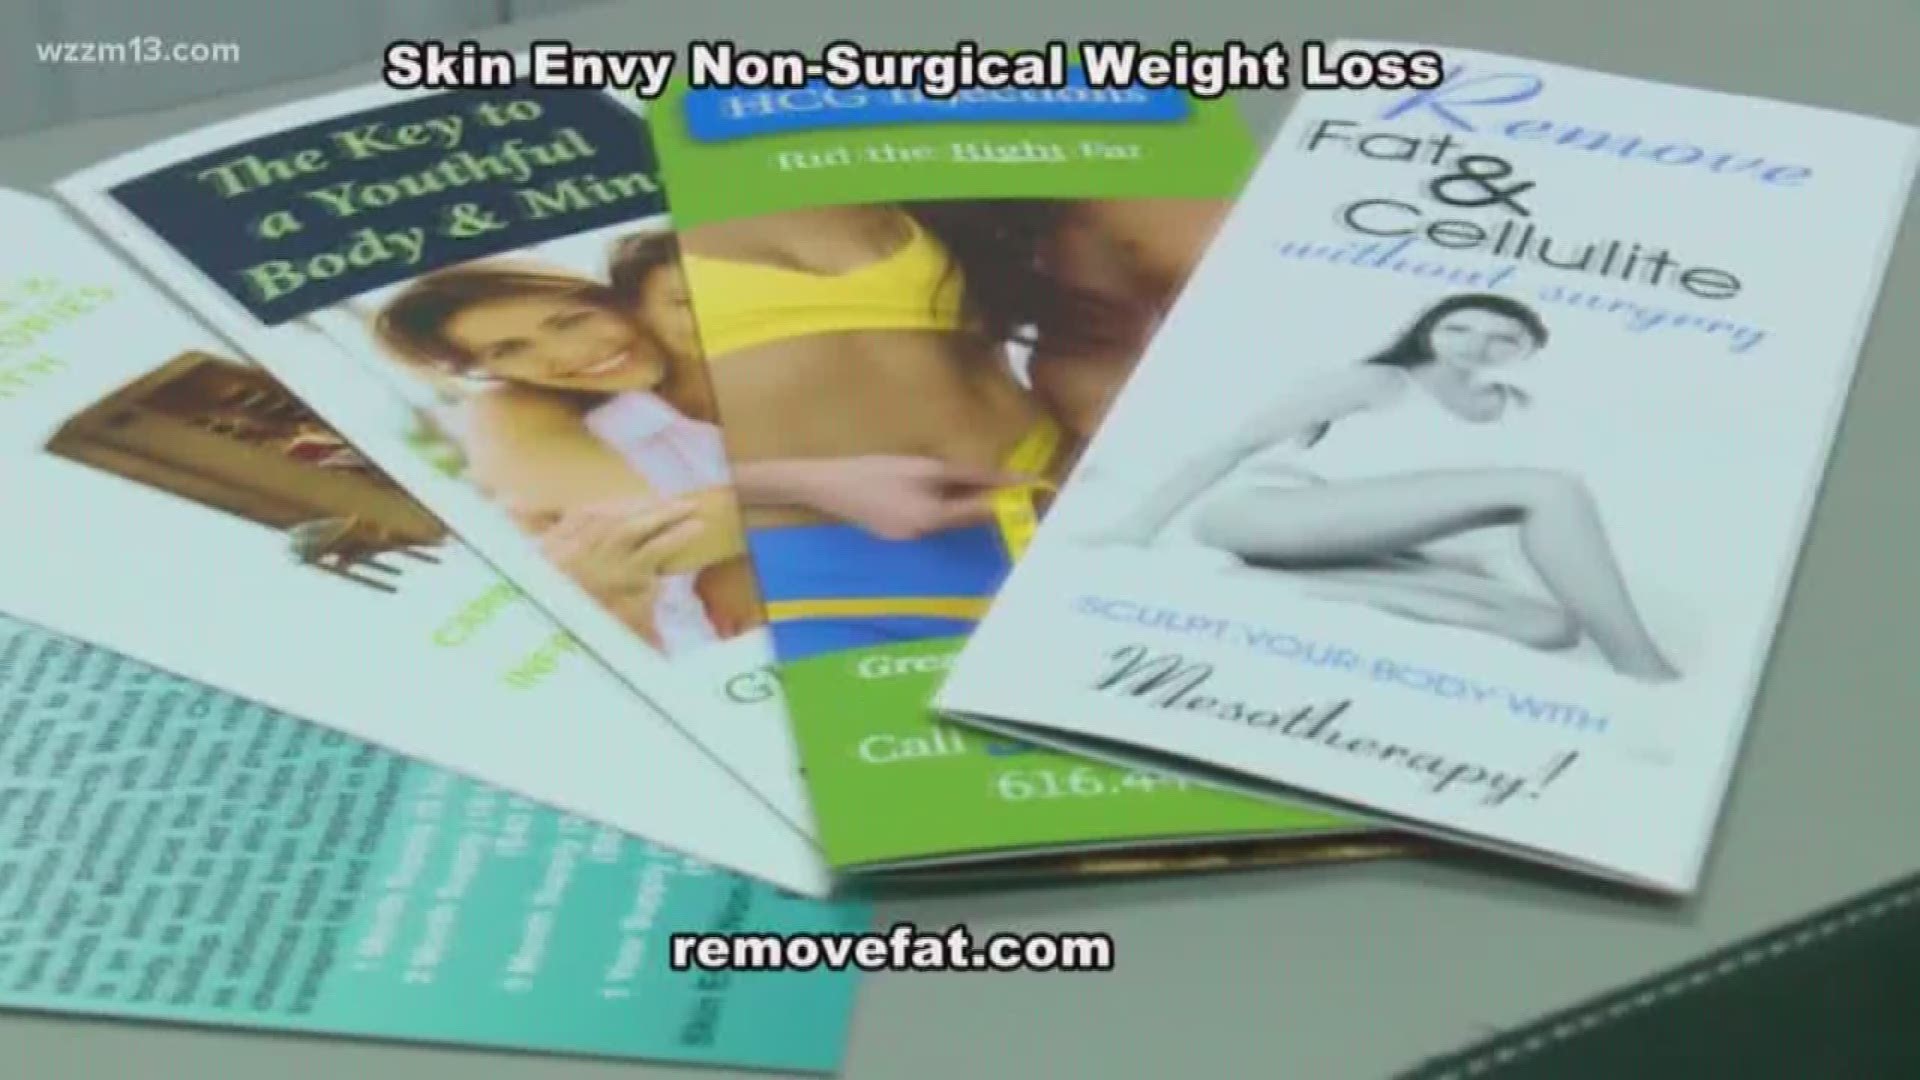 Skin Envy in Grand Rapids and Kalamazoo is a non-surgical weight loss center.